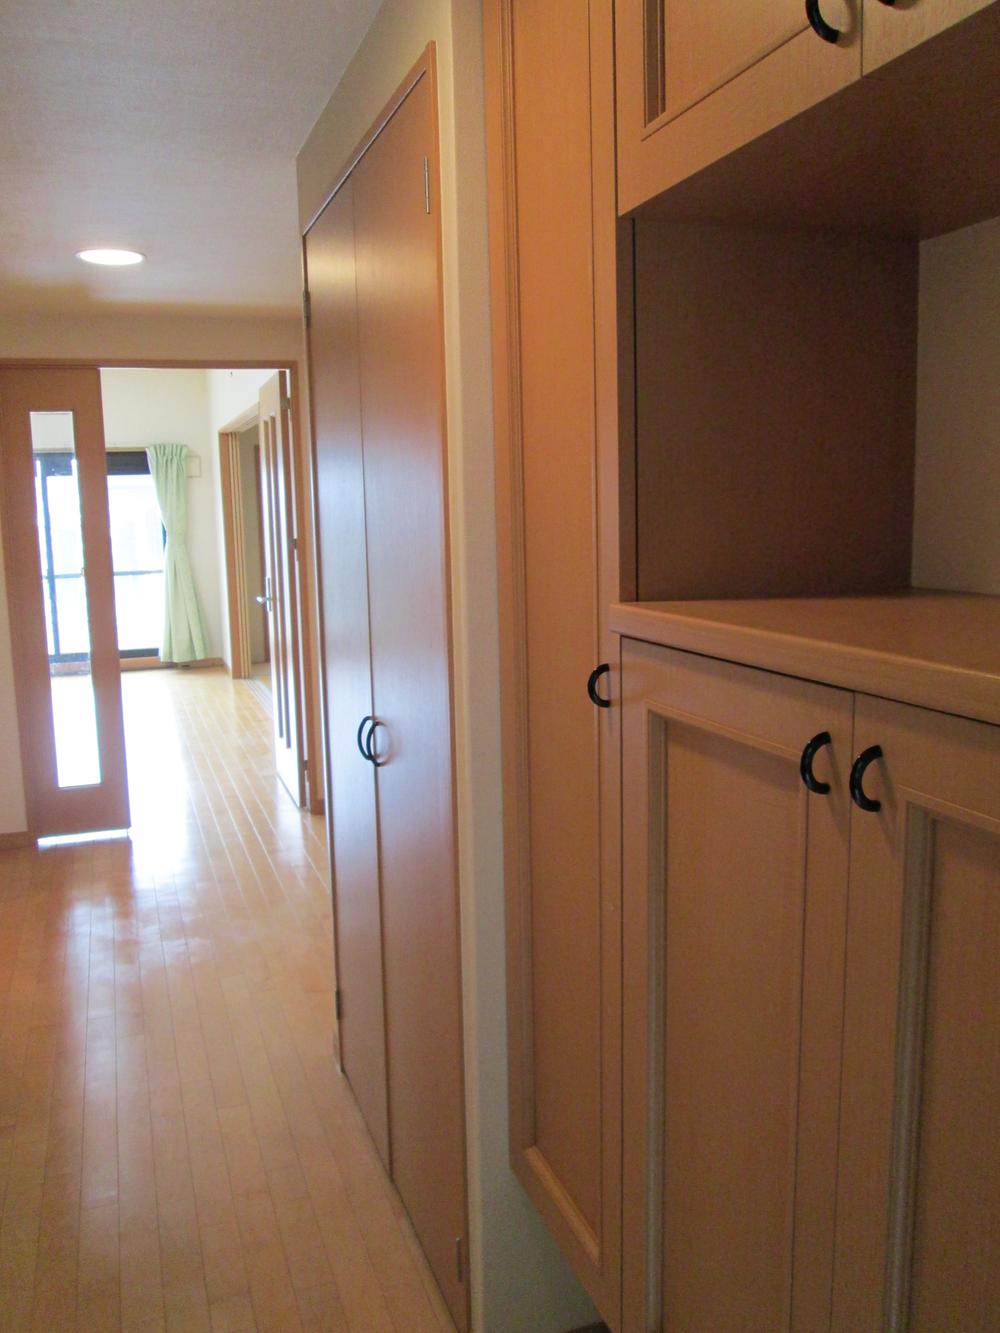 Entrance. Footwear entrance and hallway storage with a storage capacity